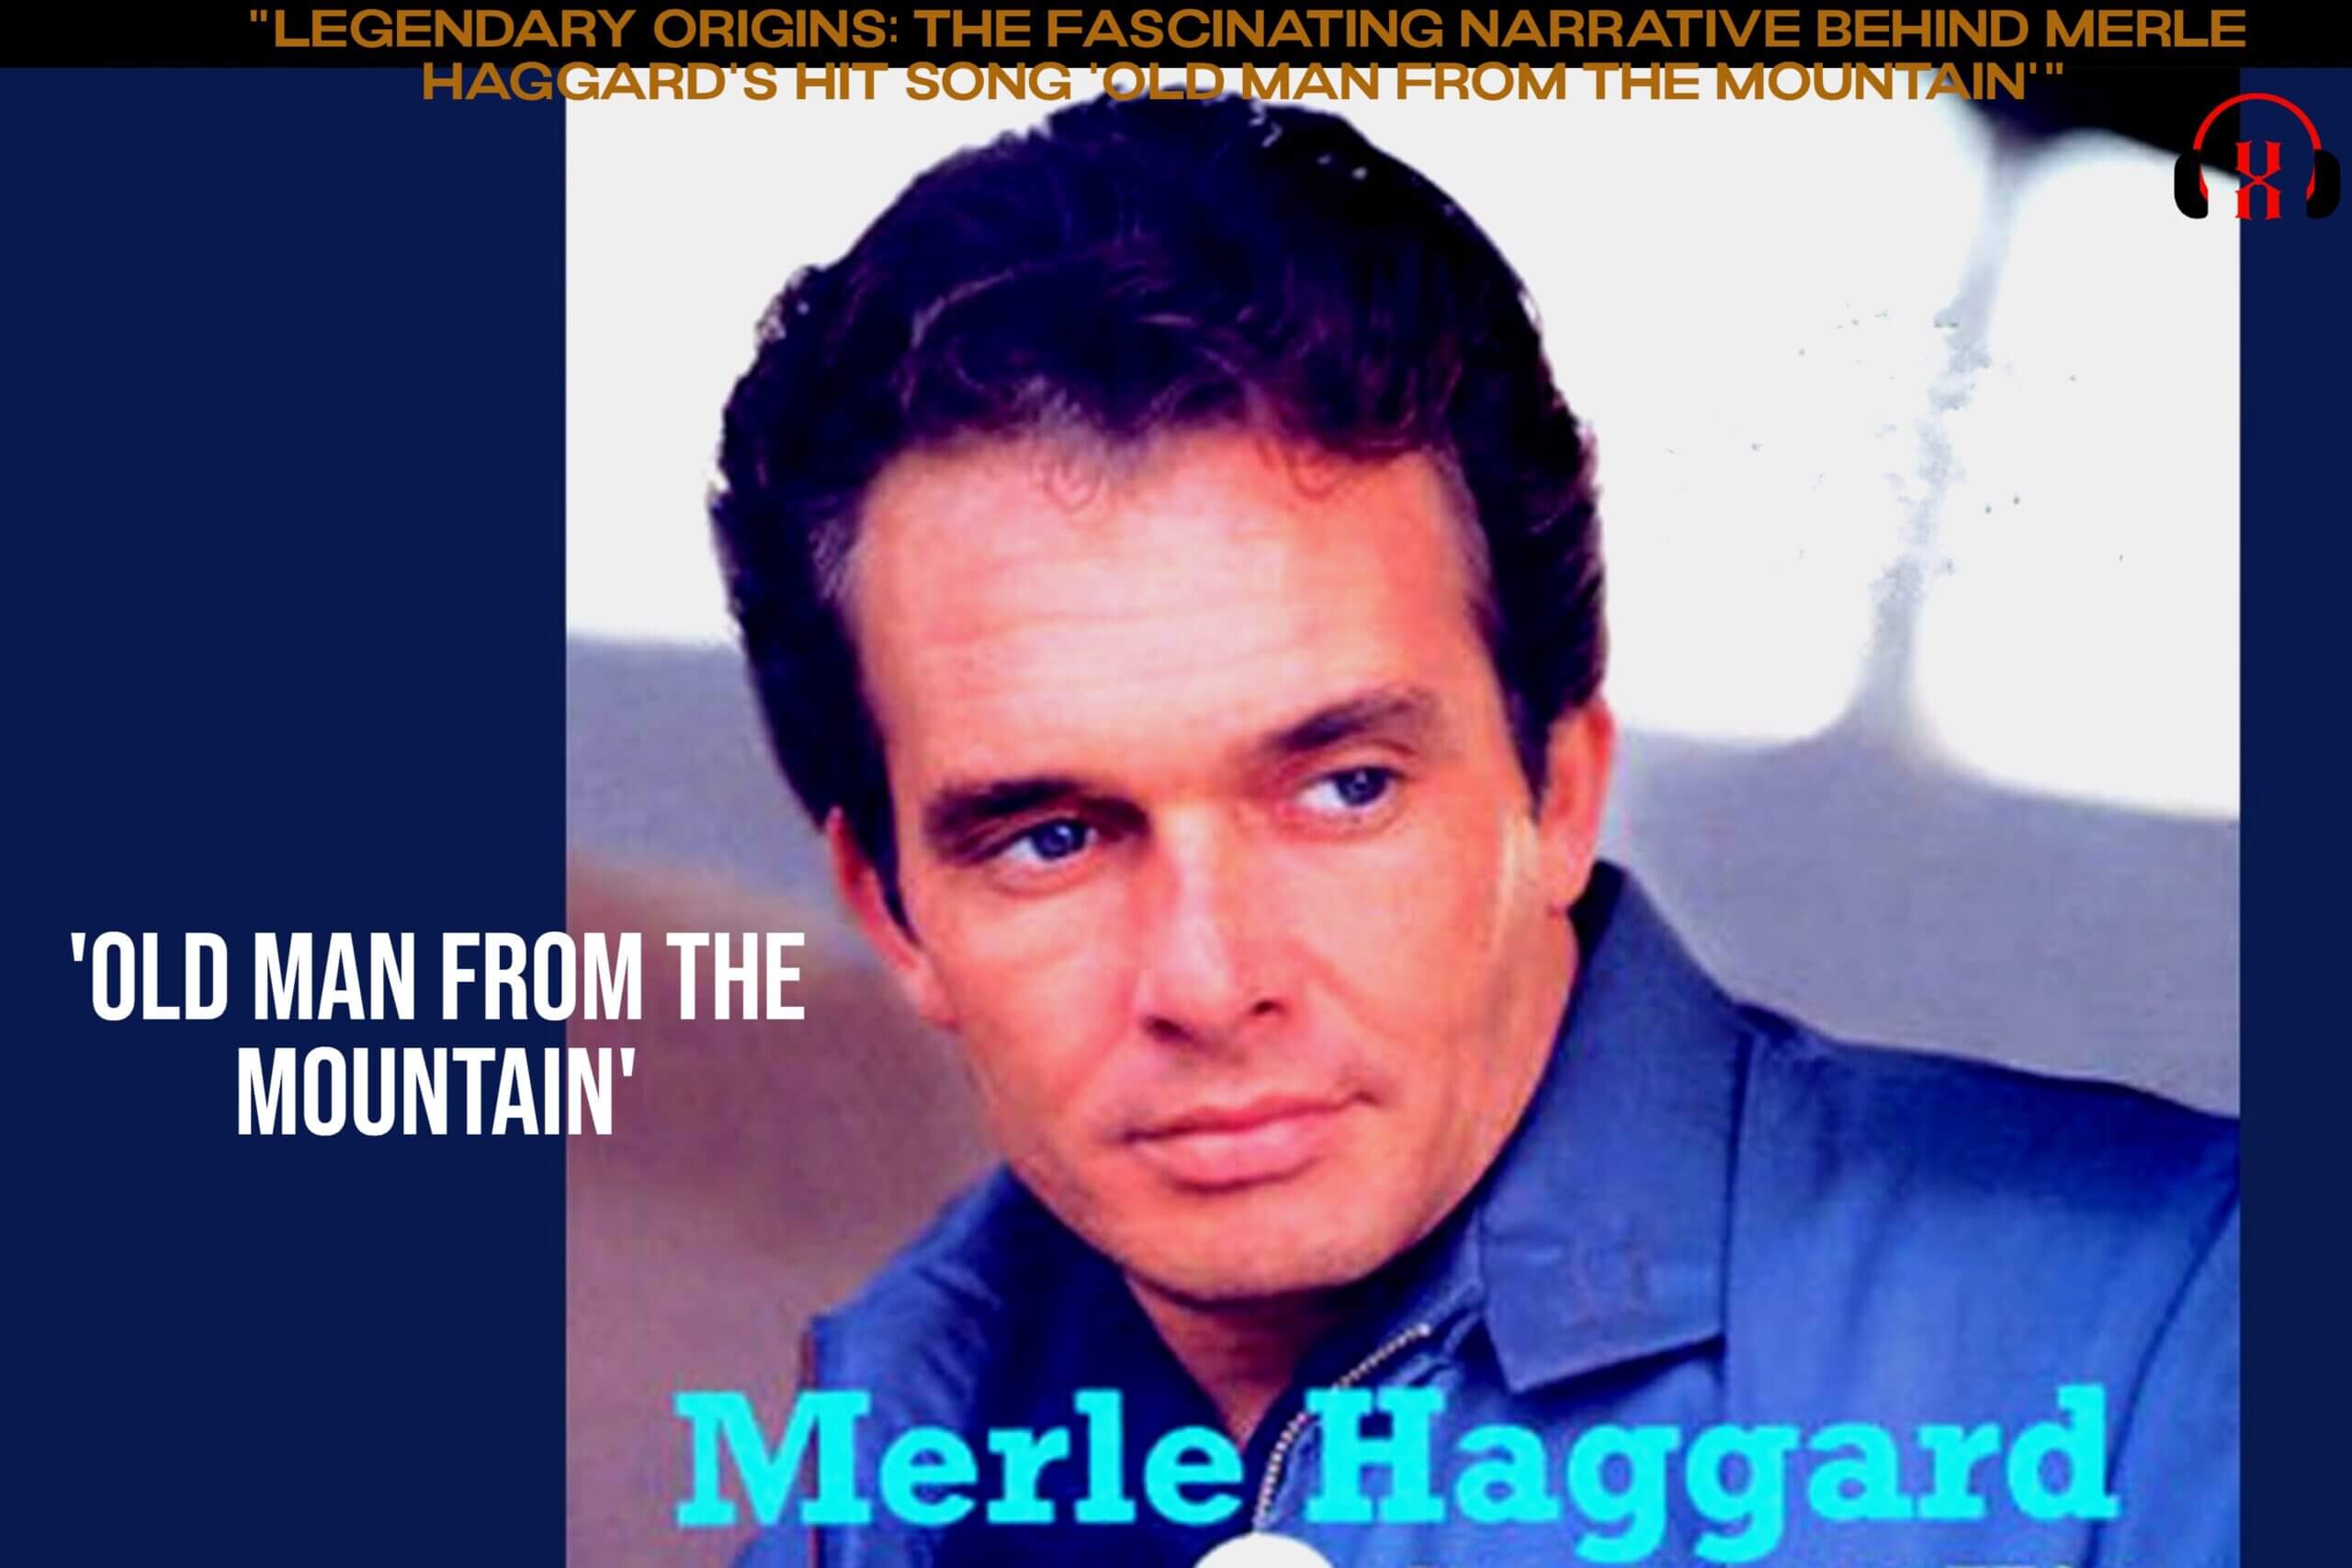 Merle Haggard's Hit Song 'Old Man From The Mountain'"